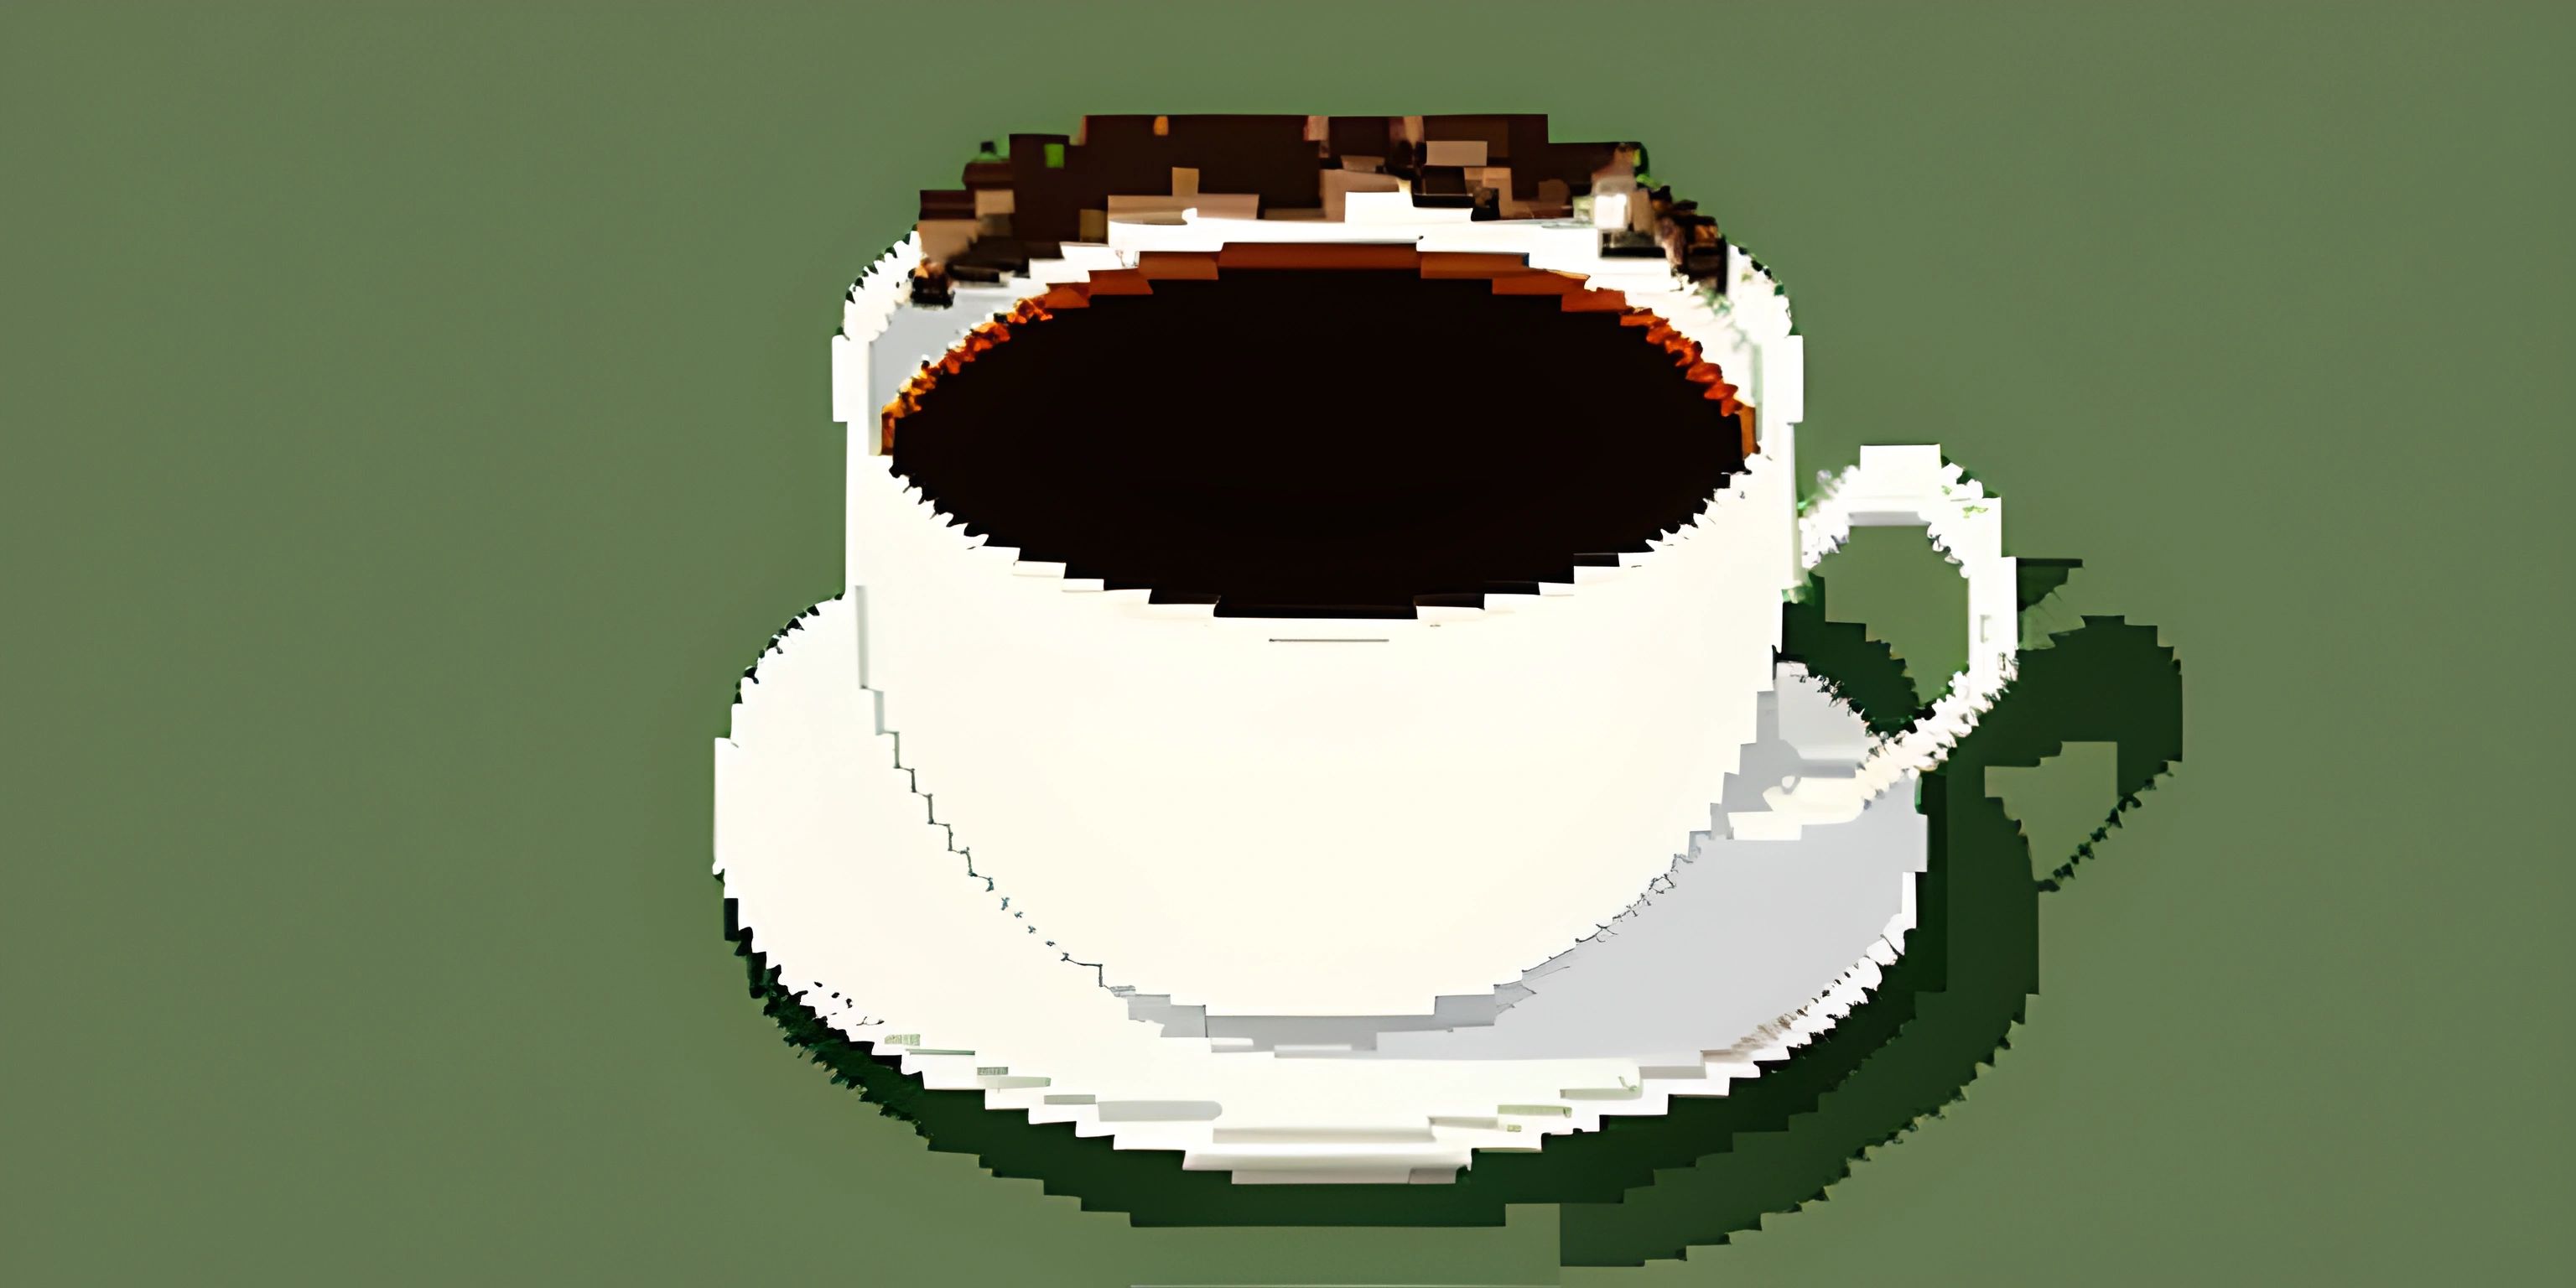 a coffee cup with a brown spot on top of it, sitting inside the shape of a half - circle